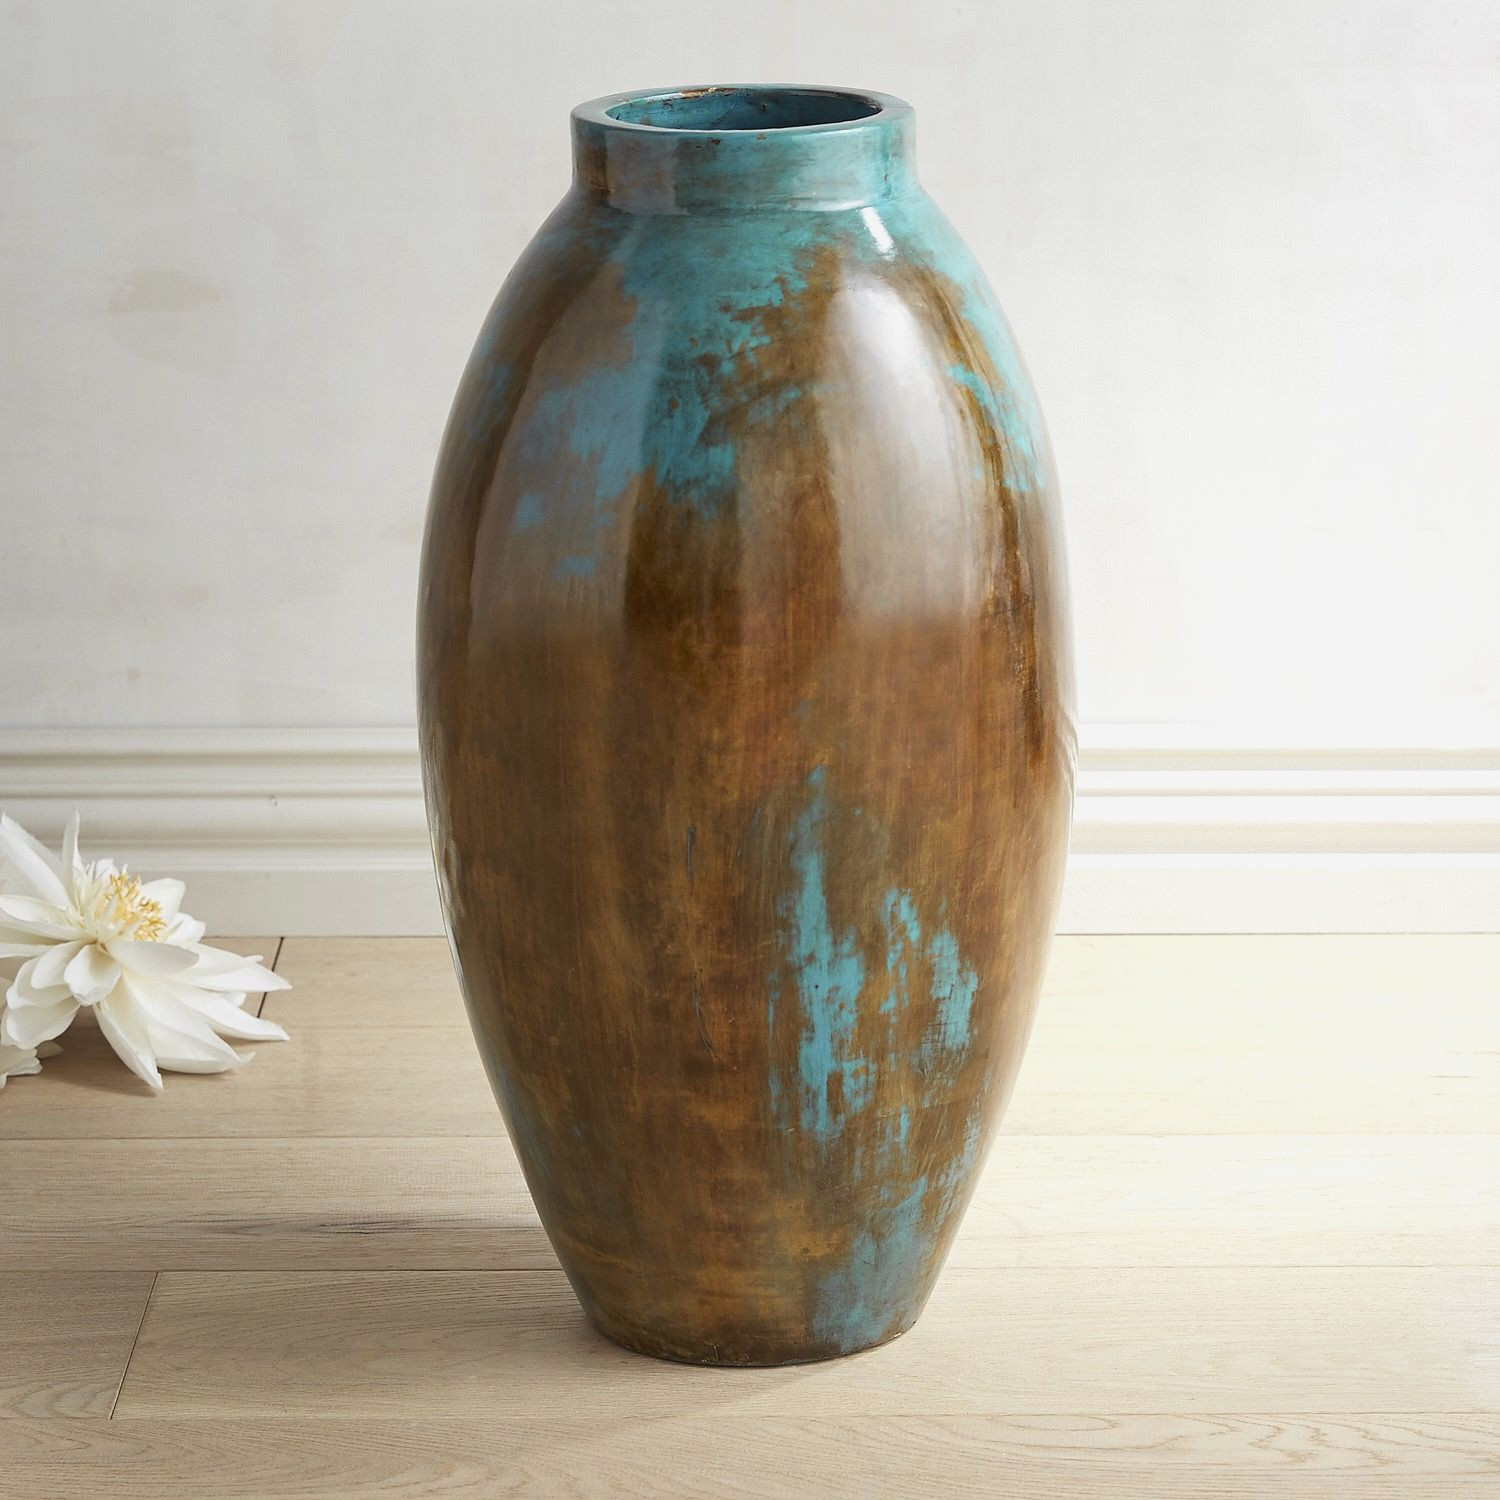 28 Amazing Pier One Vases 2022 free download pier one vases of ideas fresh extra large floor vases decoration ideas collection with regard to fascinating extra large floor vases for interior decorating ideas fresh extra large floor vas